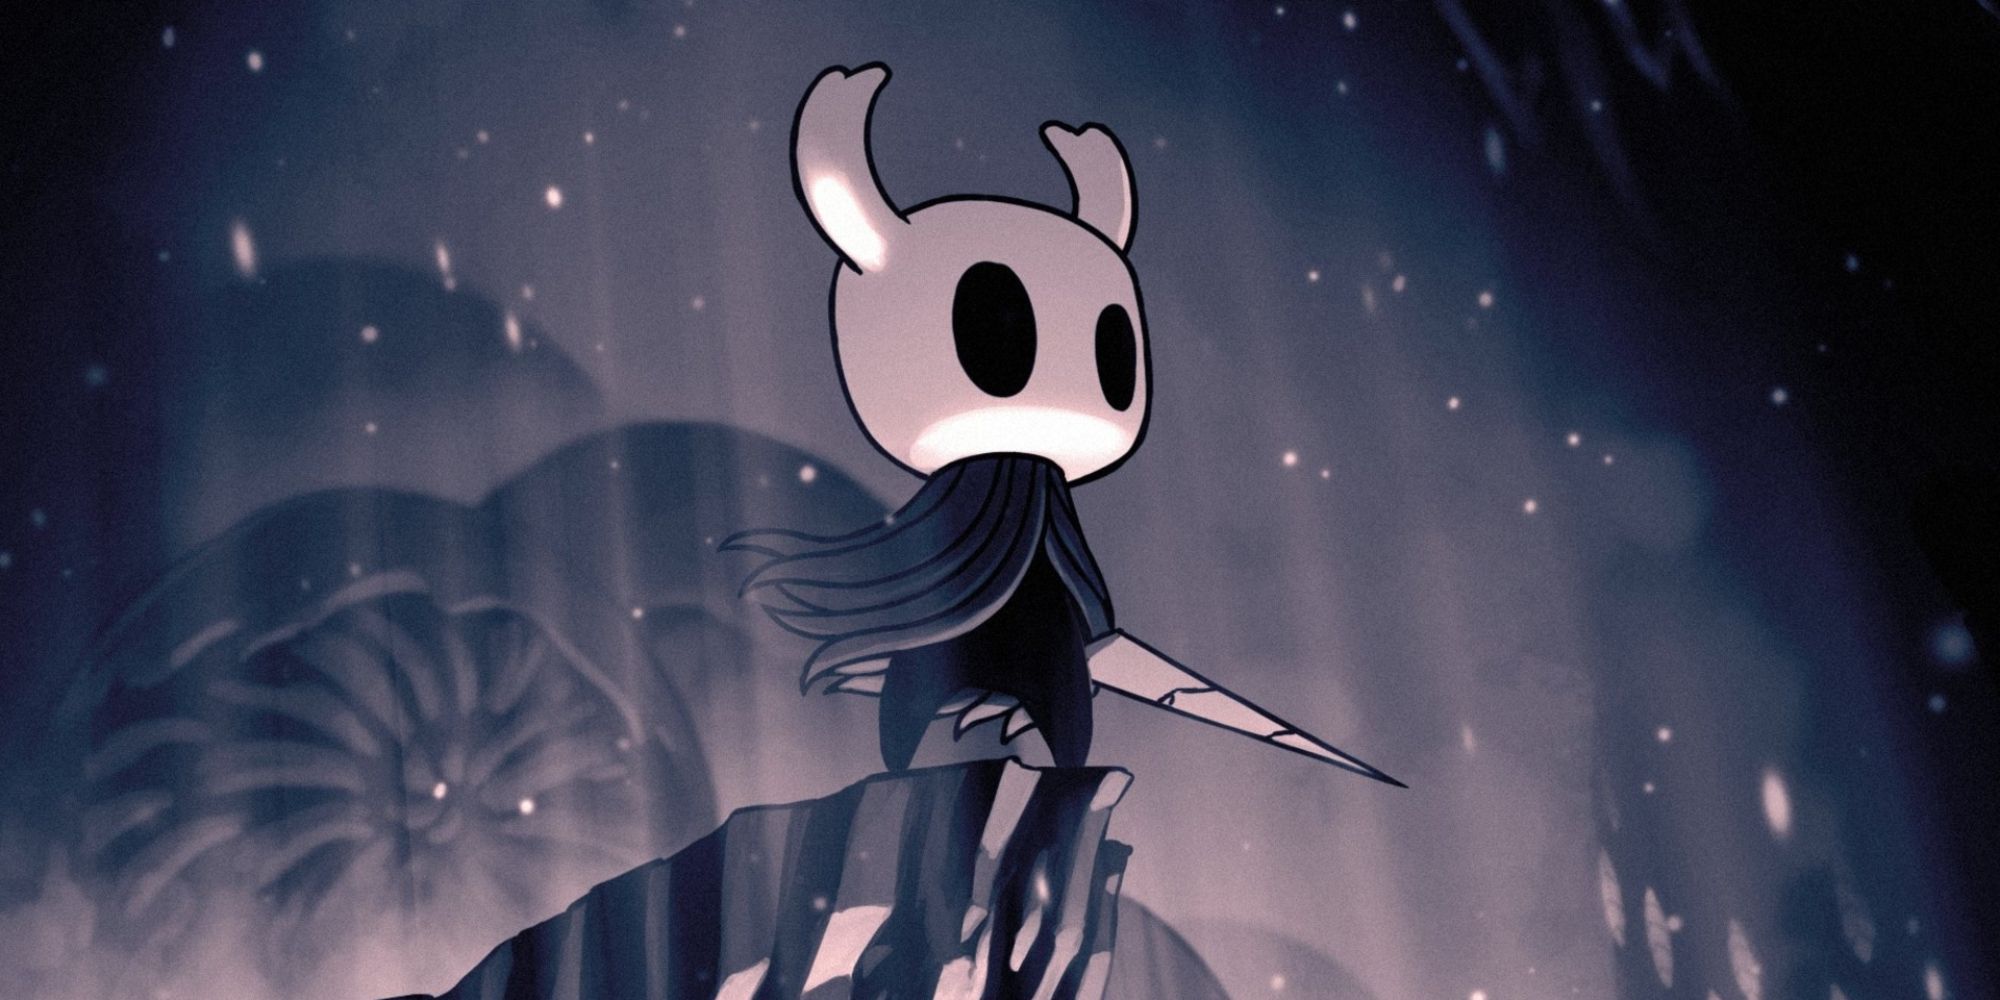 The main character of Hollow Knight